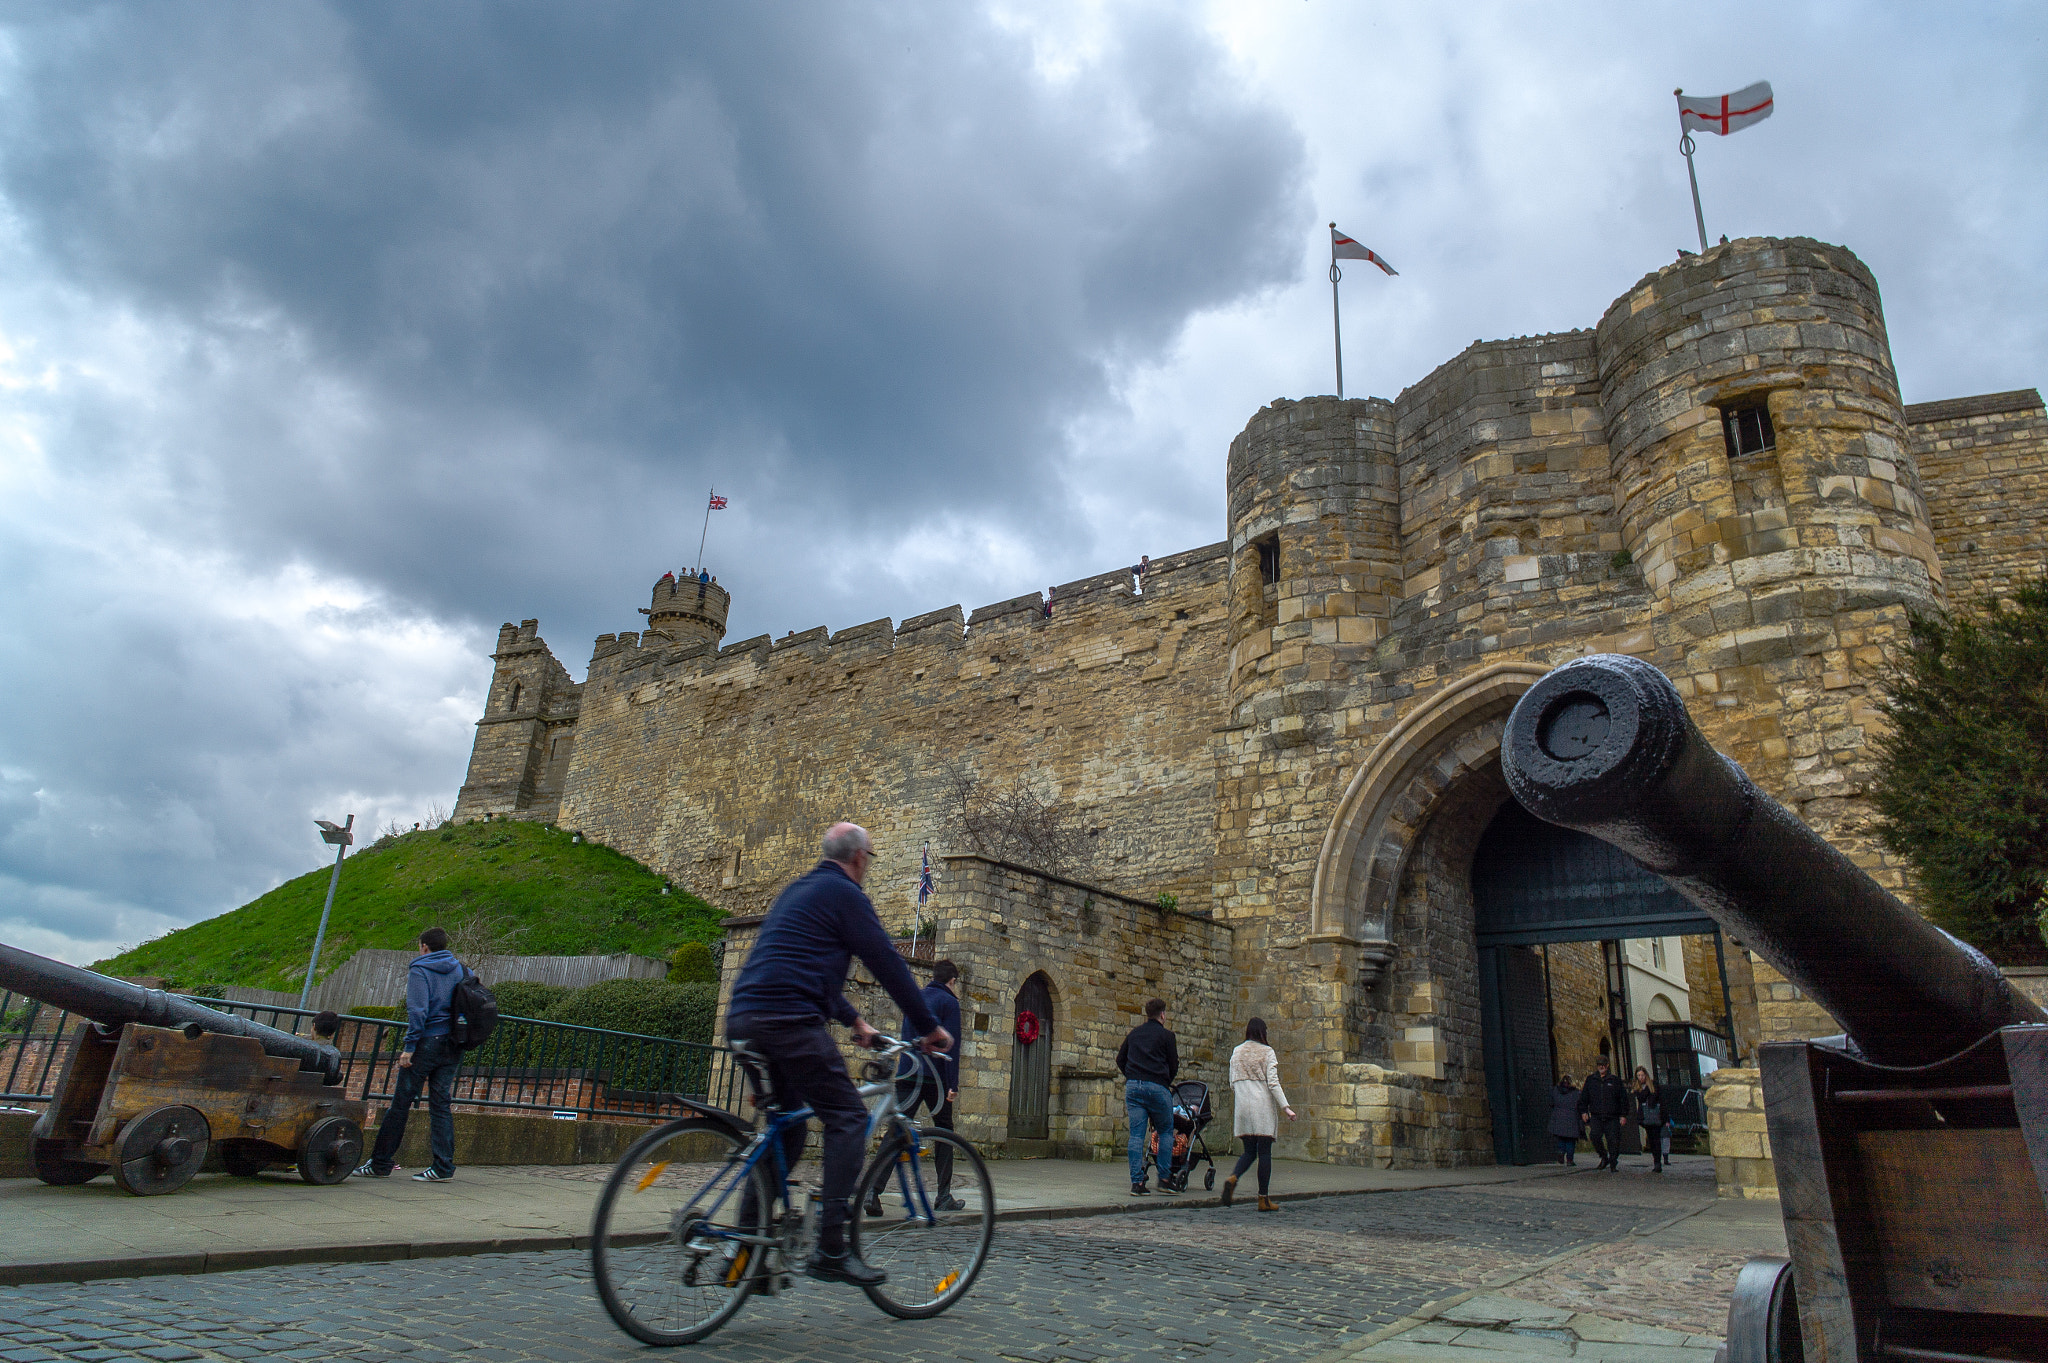 Leica M9 + Elmarit-M 21mm f/2.8 sample photo. Lincoln castle, cannons, bicycle, gate, magna carta, lincolnshire,uk  .
jaimanuel freire photography